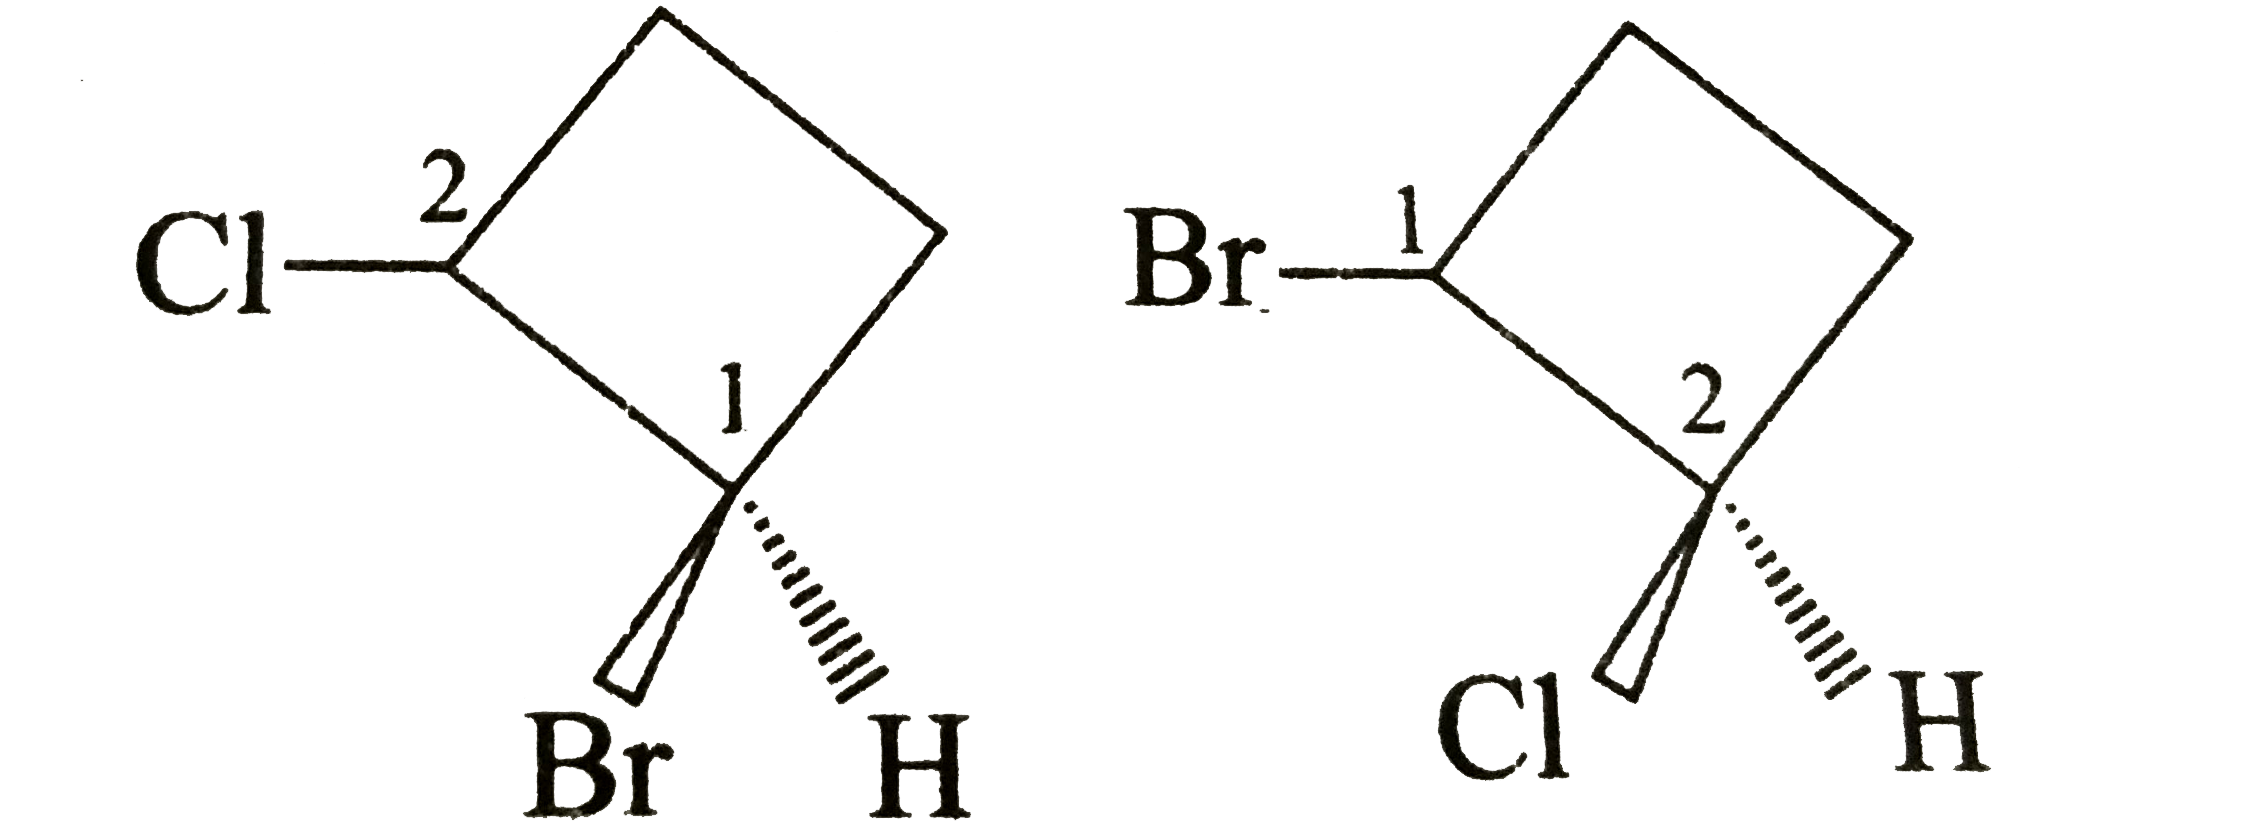 The configuration of 1 and 2 carbon atom in the following compounds is